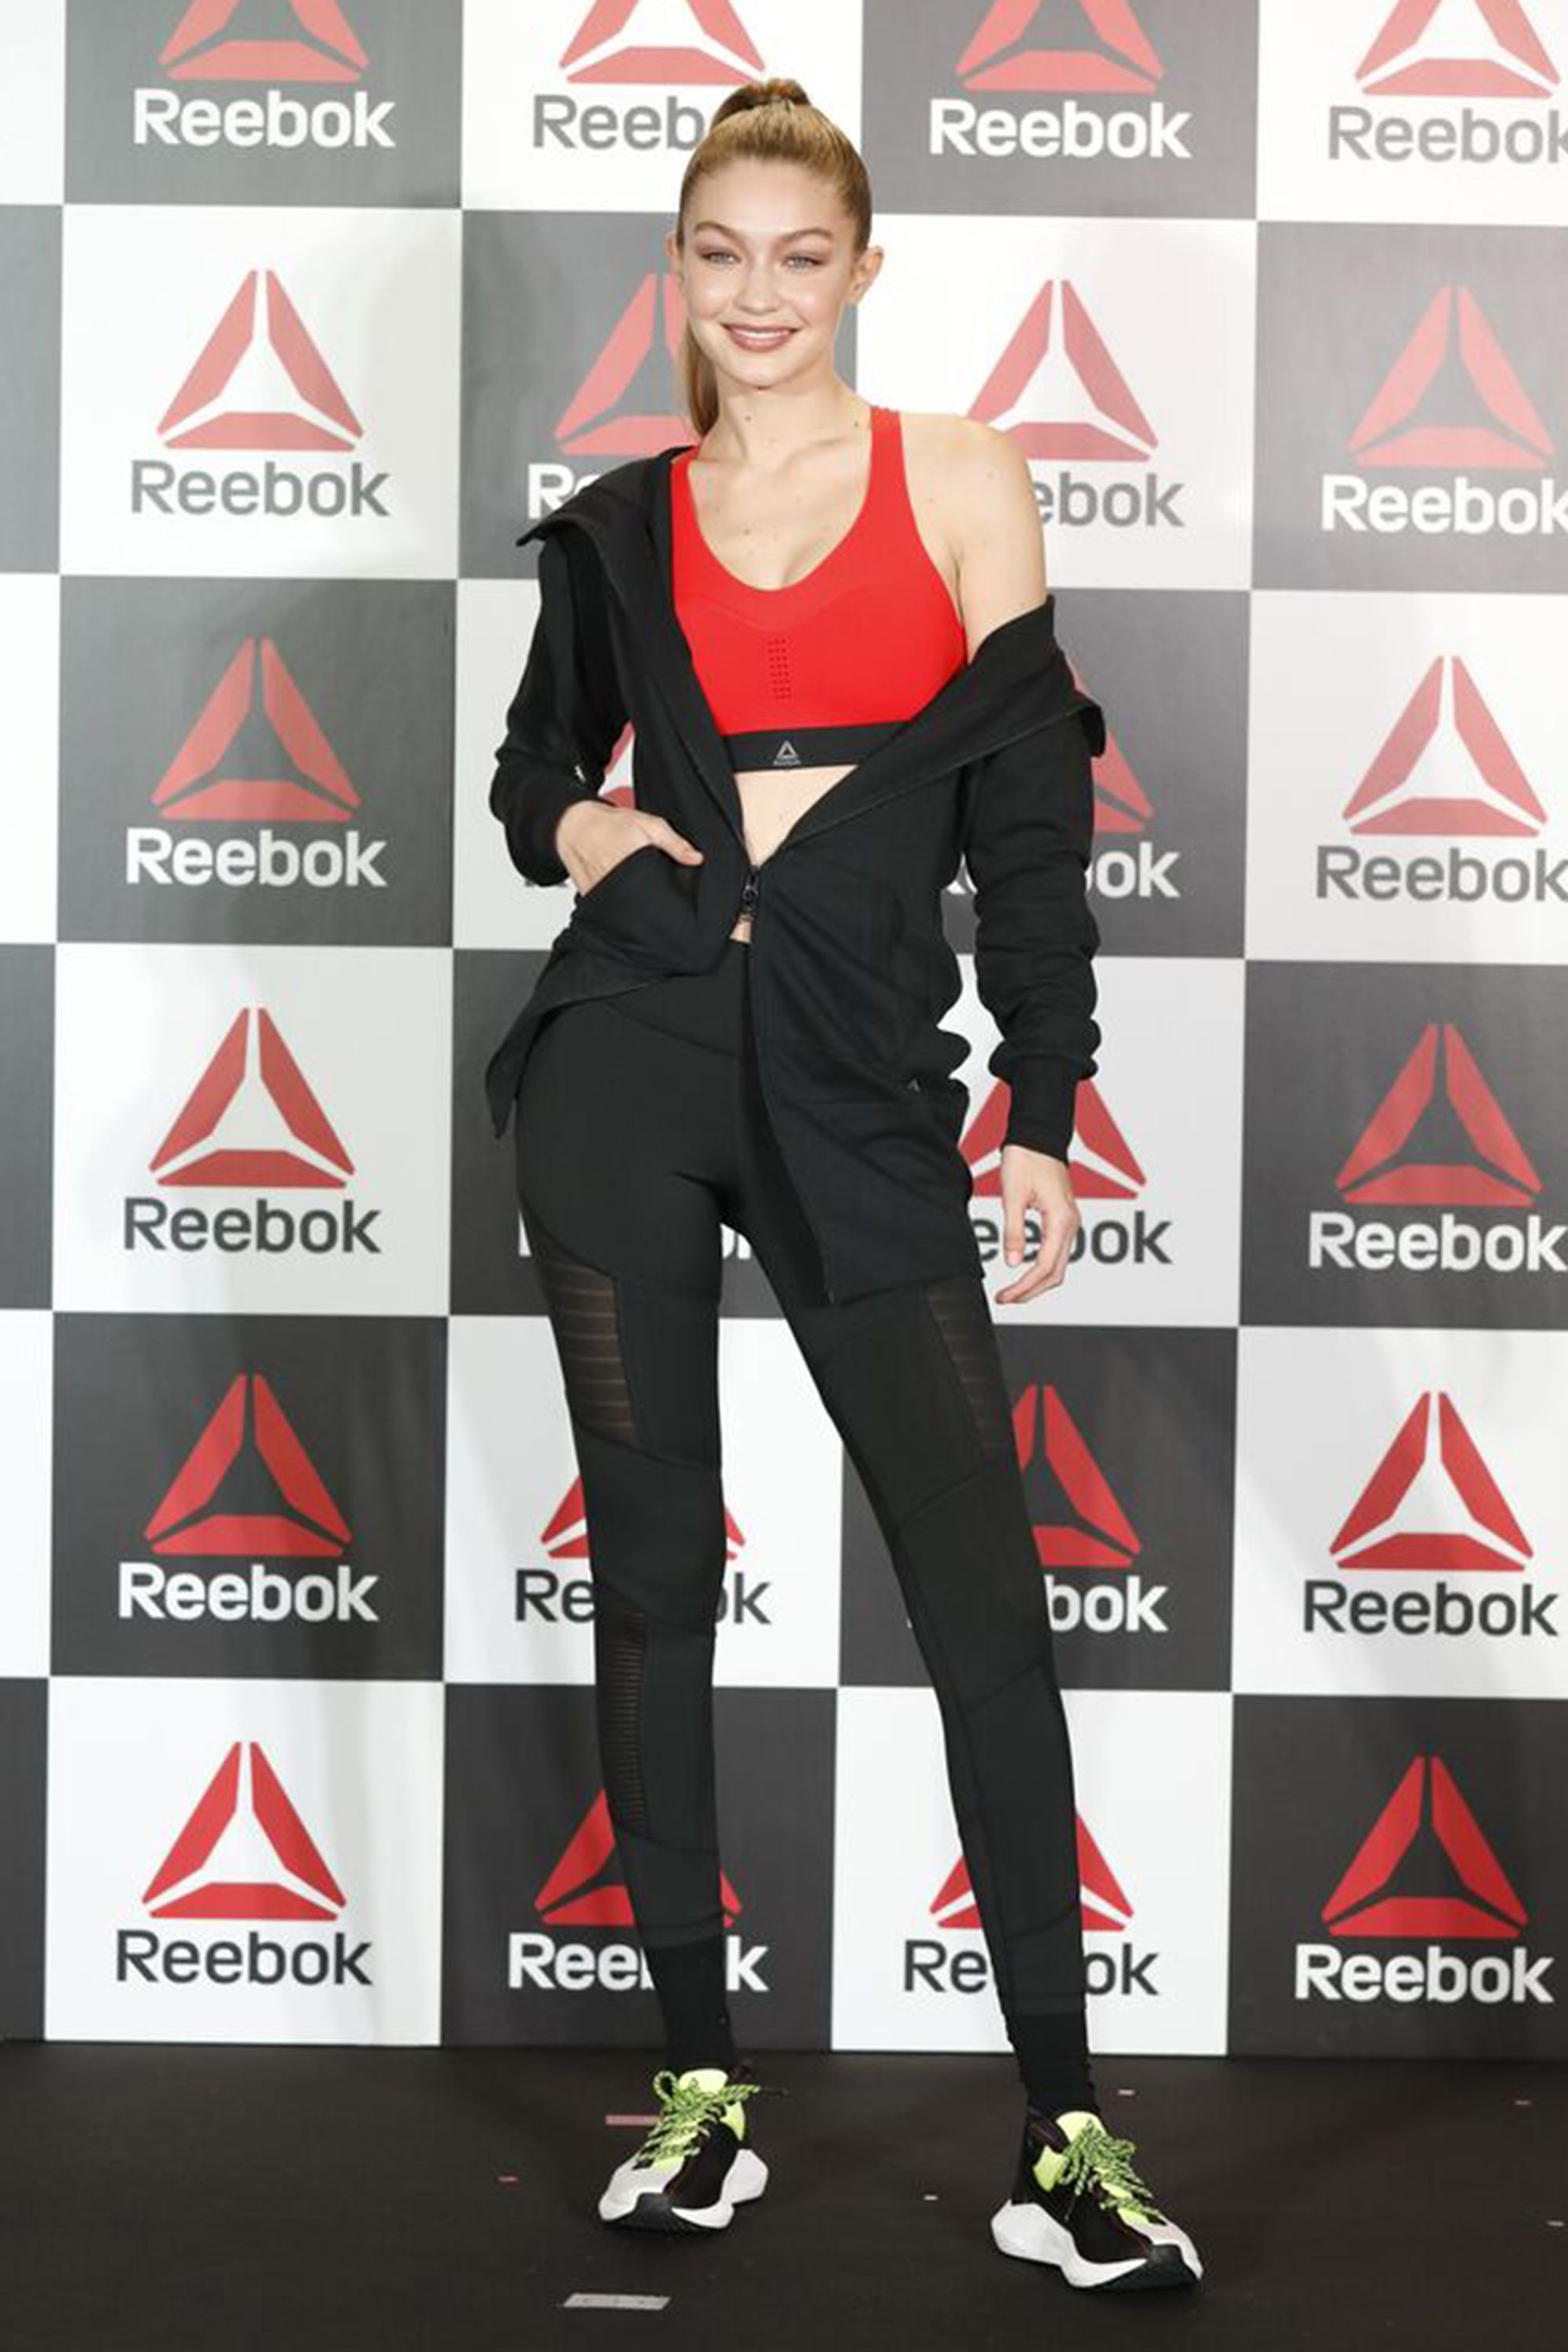 unveils her new collaboration with Reebok